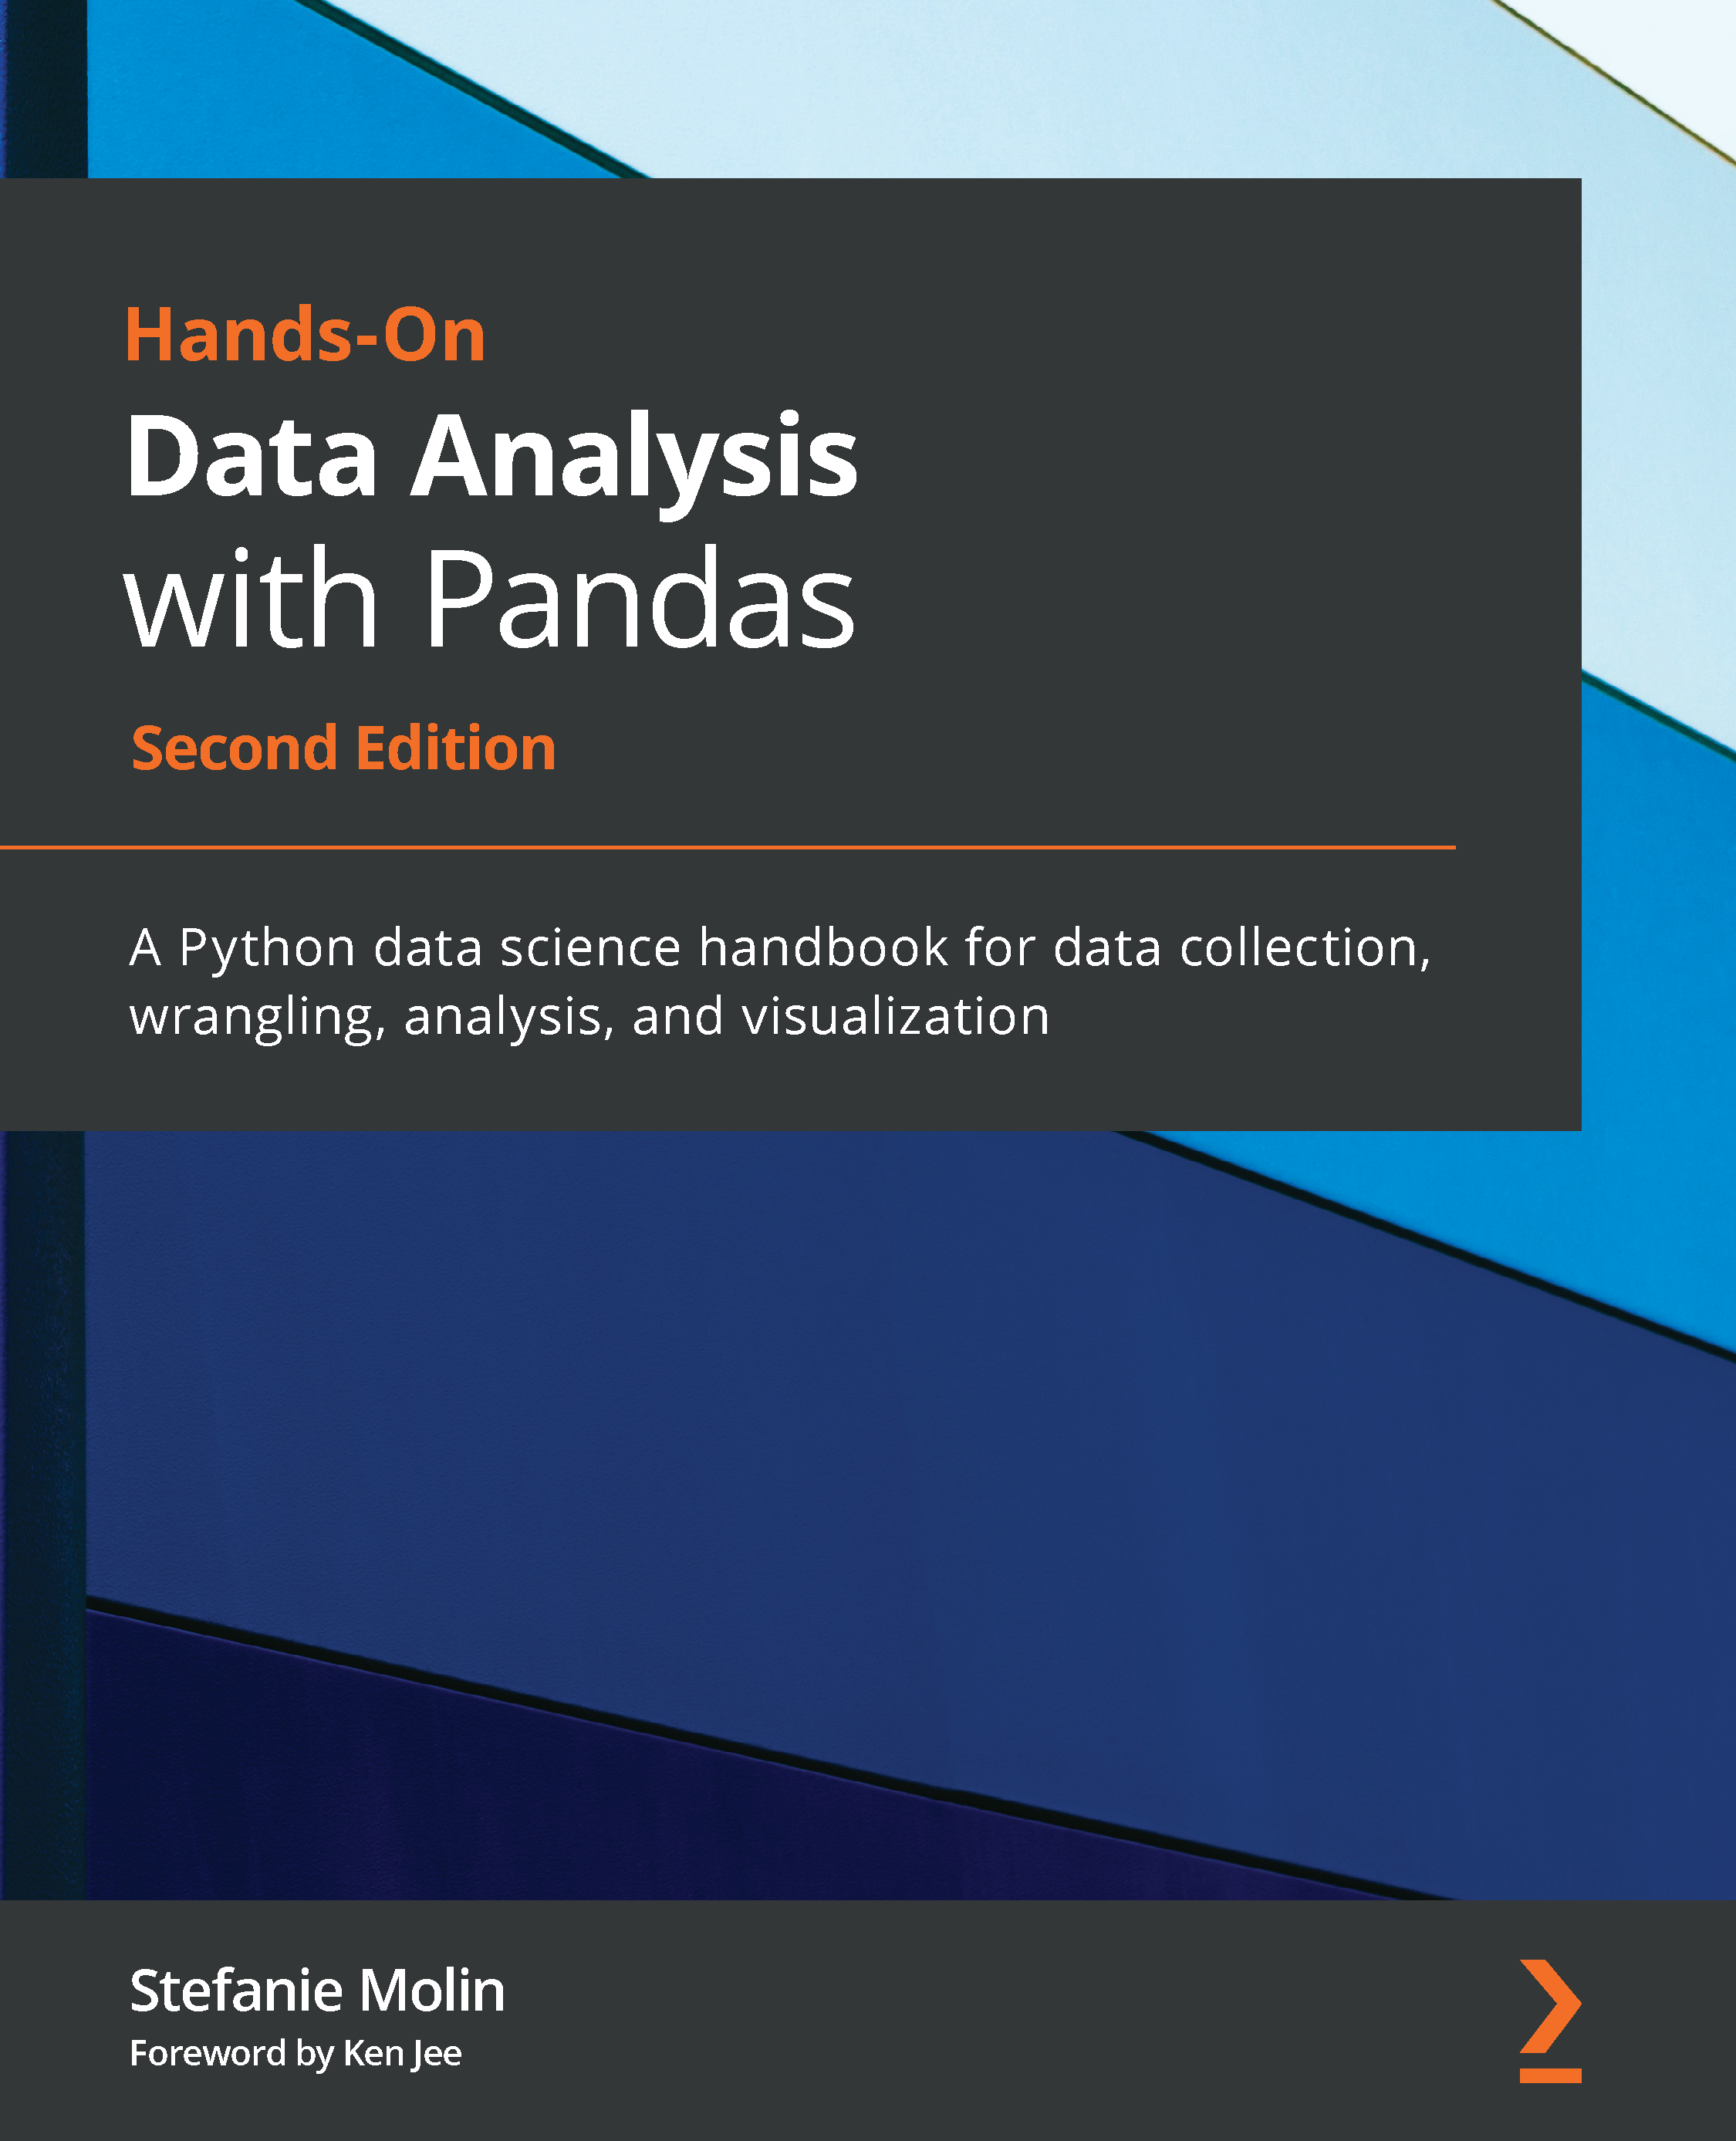 Hands-On Data Analysis with Pandas – Second Edition